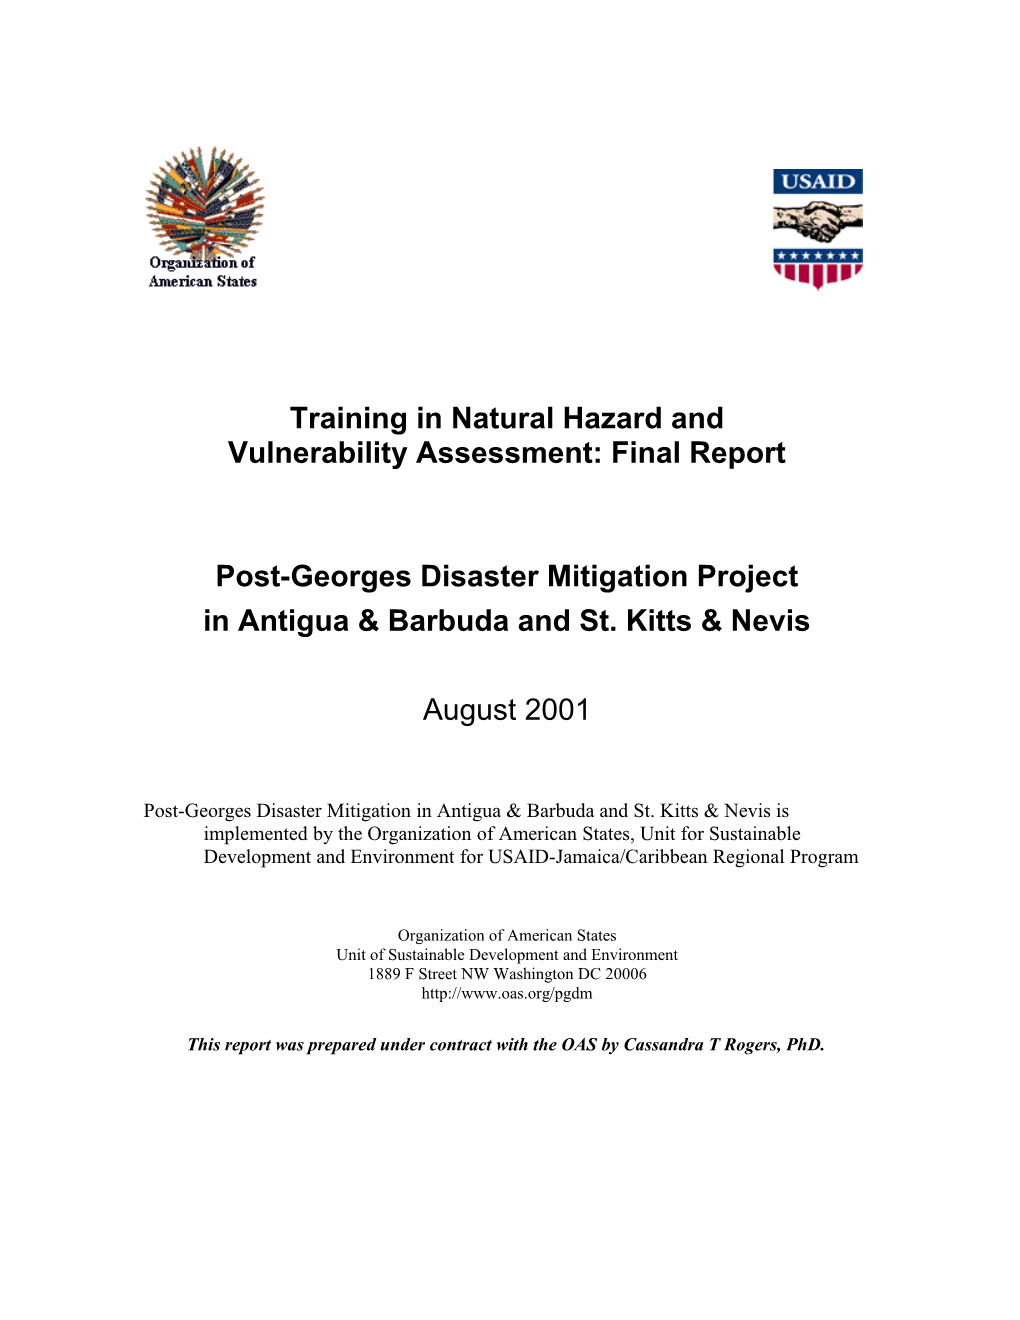 PGDM: Training In Natural Hazard And Vulnerability Assessment: Final Report